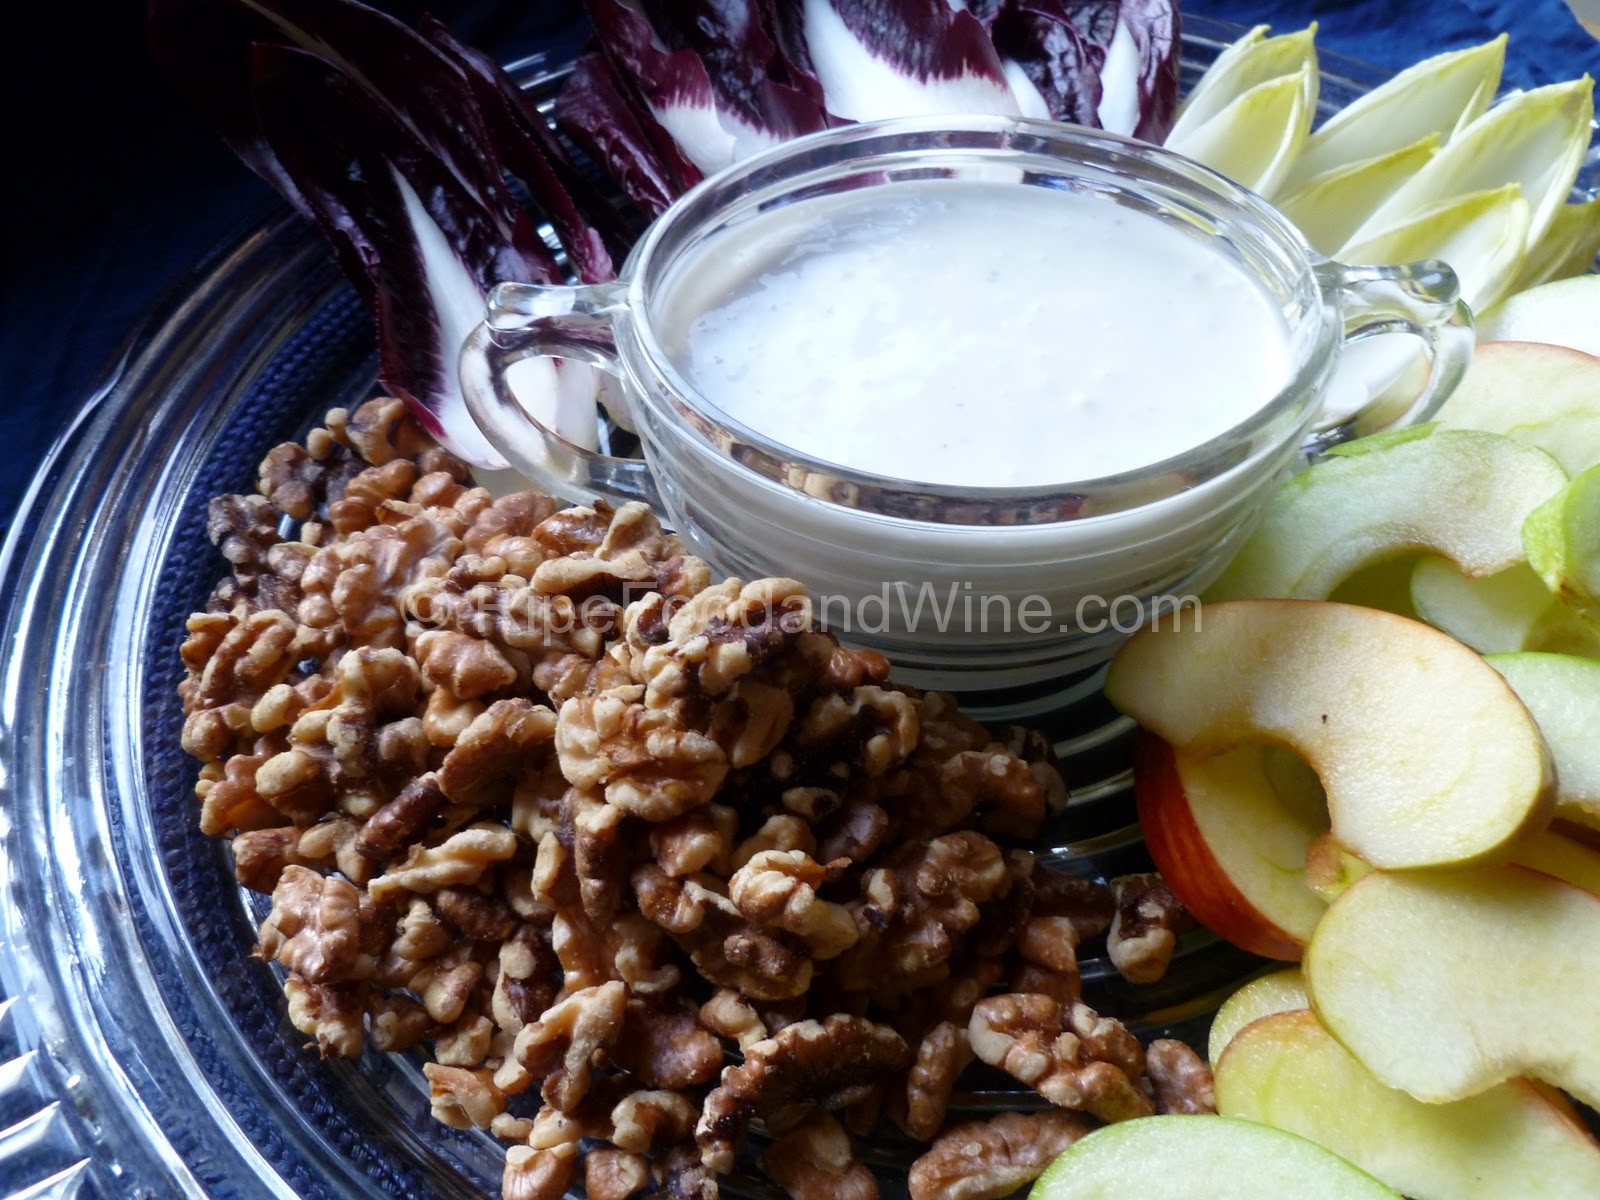 Deconstructed Waldorf Salad with Blue Cheese Dip